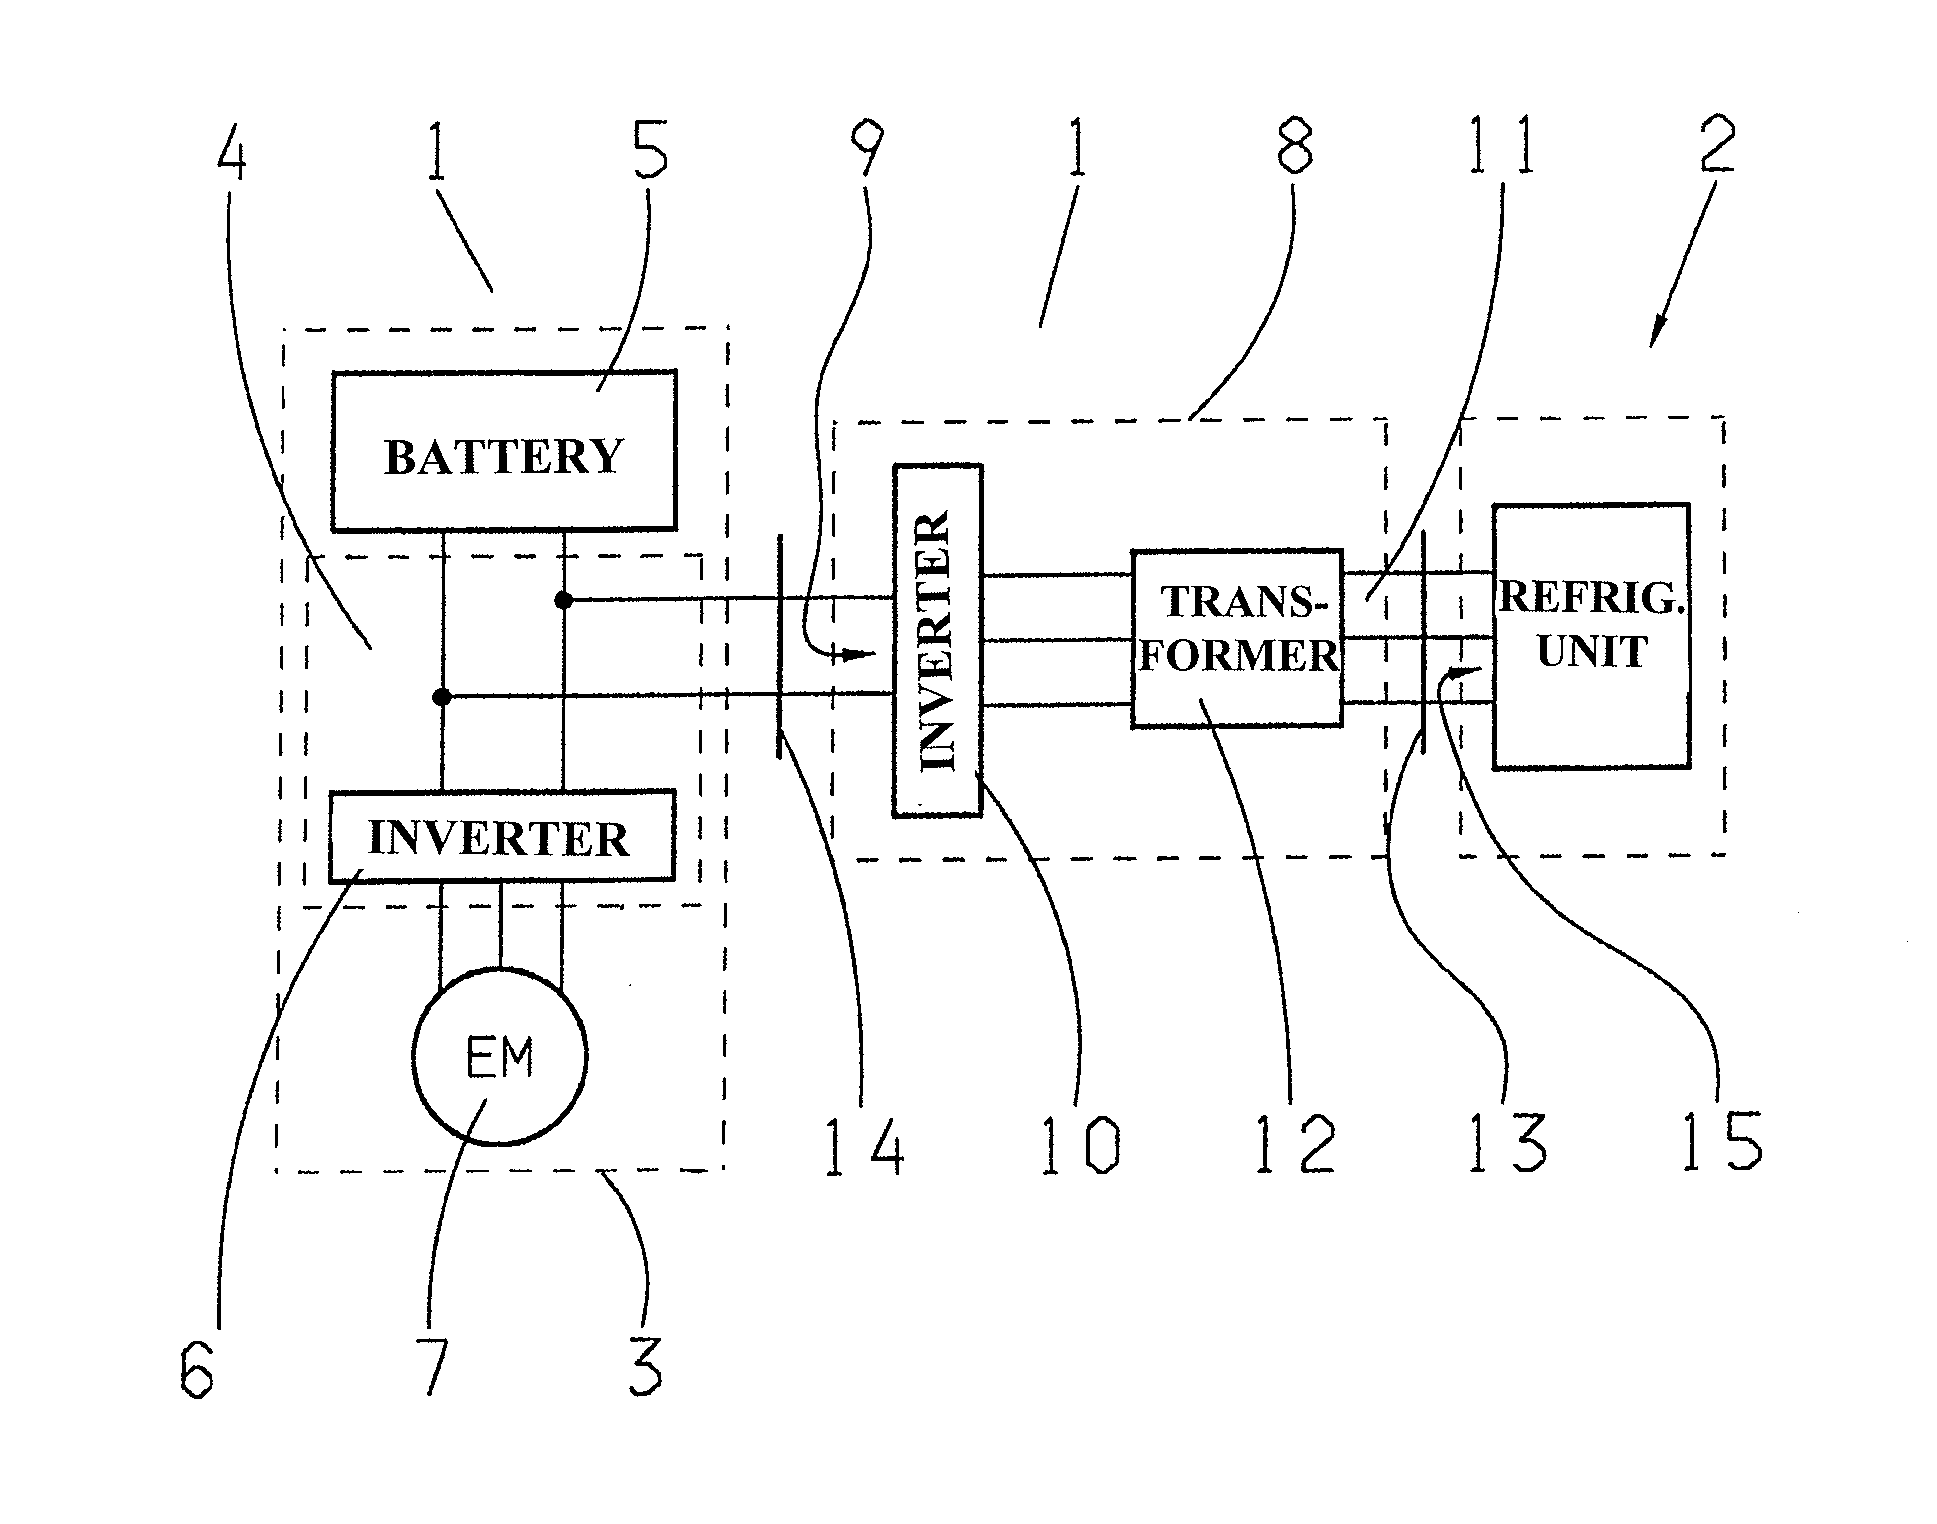 Power supply device and unit